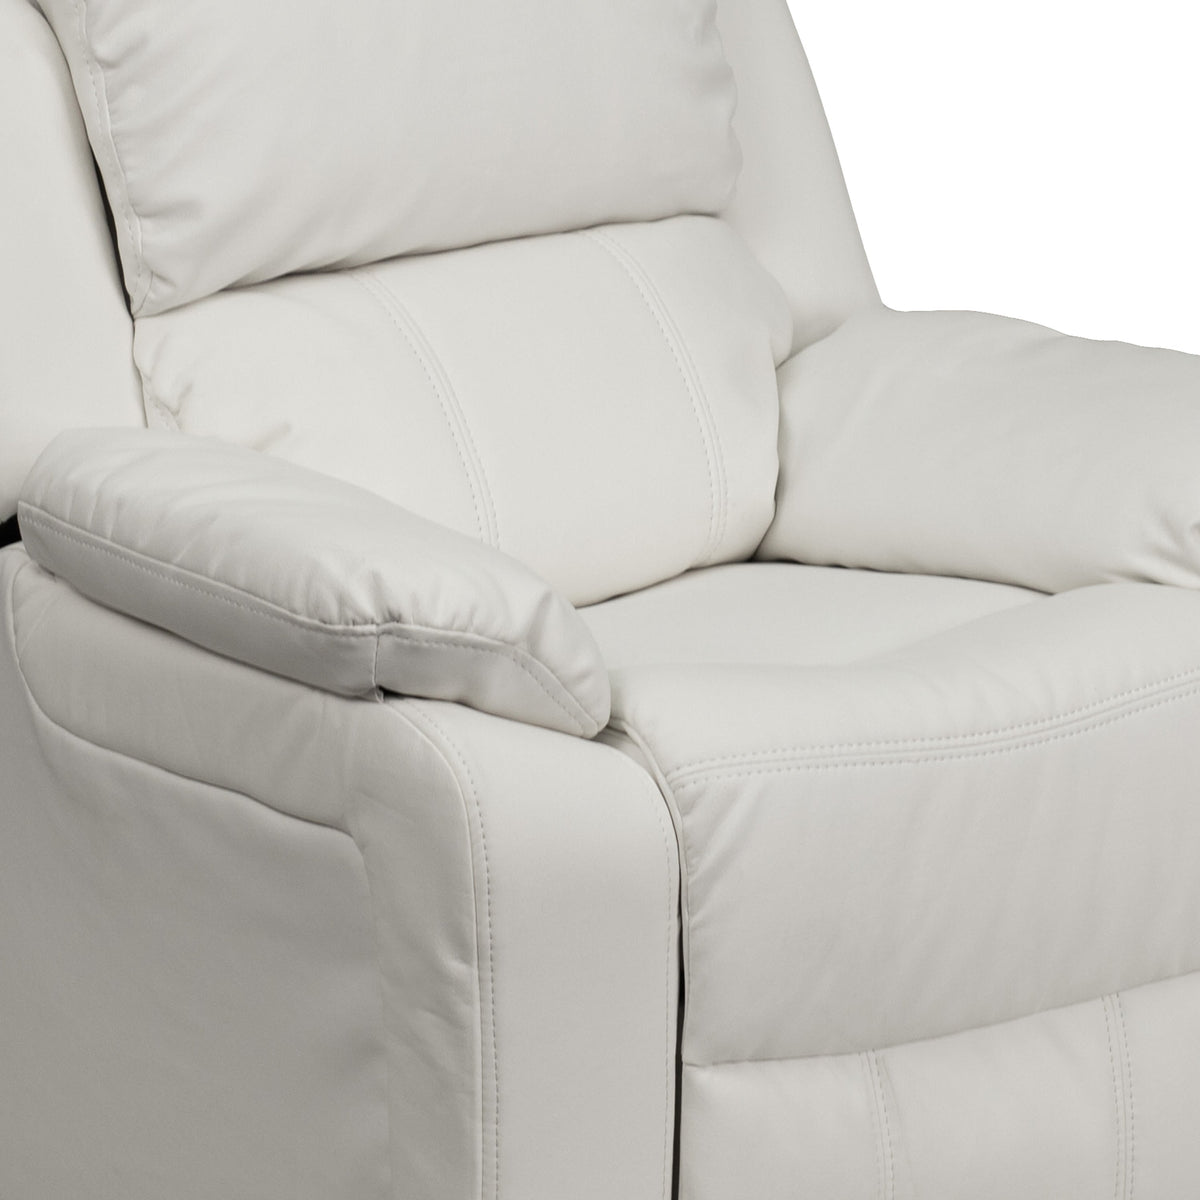 White Vinyl |#| Deluxe Padded Contemporary White Vinyl Kids Recliner with Storage Arms